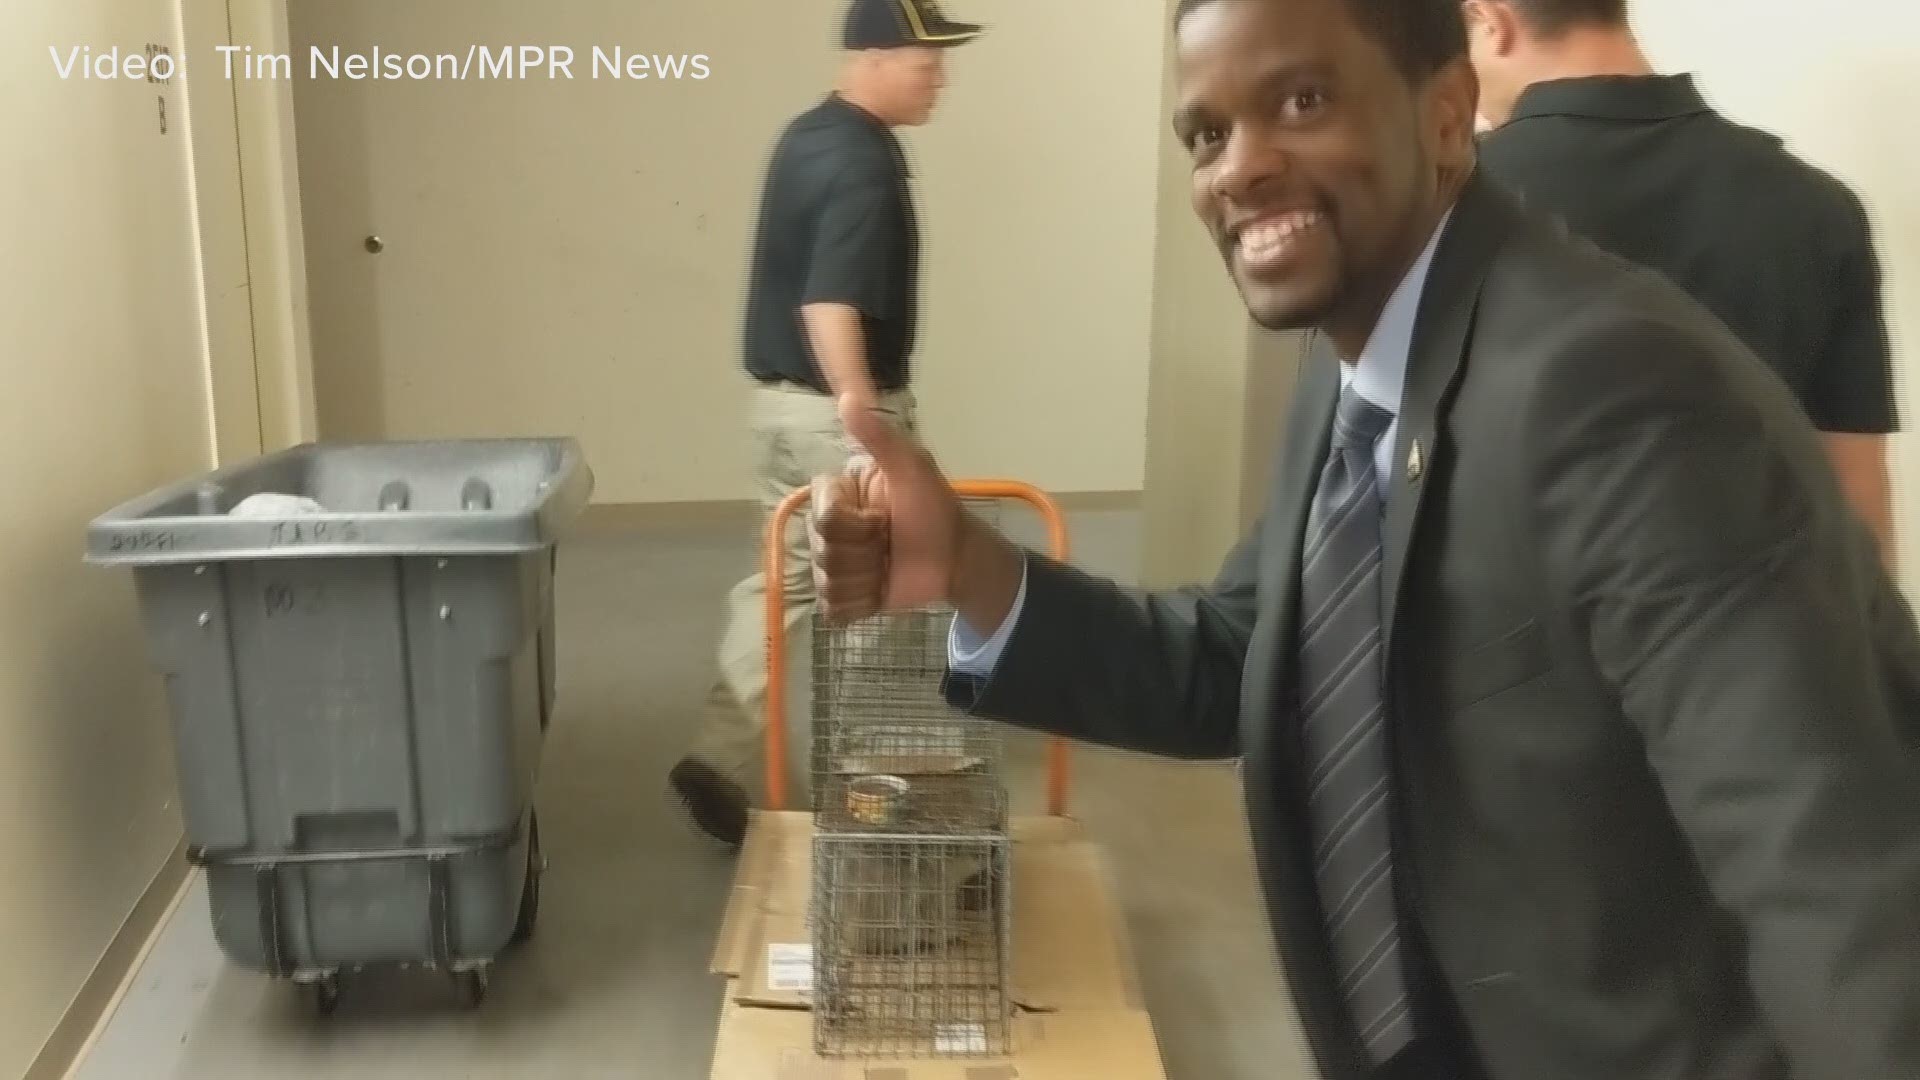 MPR News reporter Tim Nelson's video of raccoon being removed from UBS roof